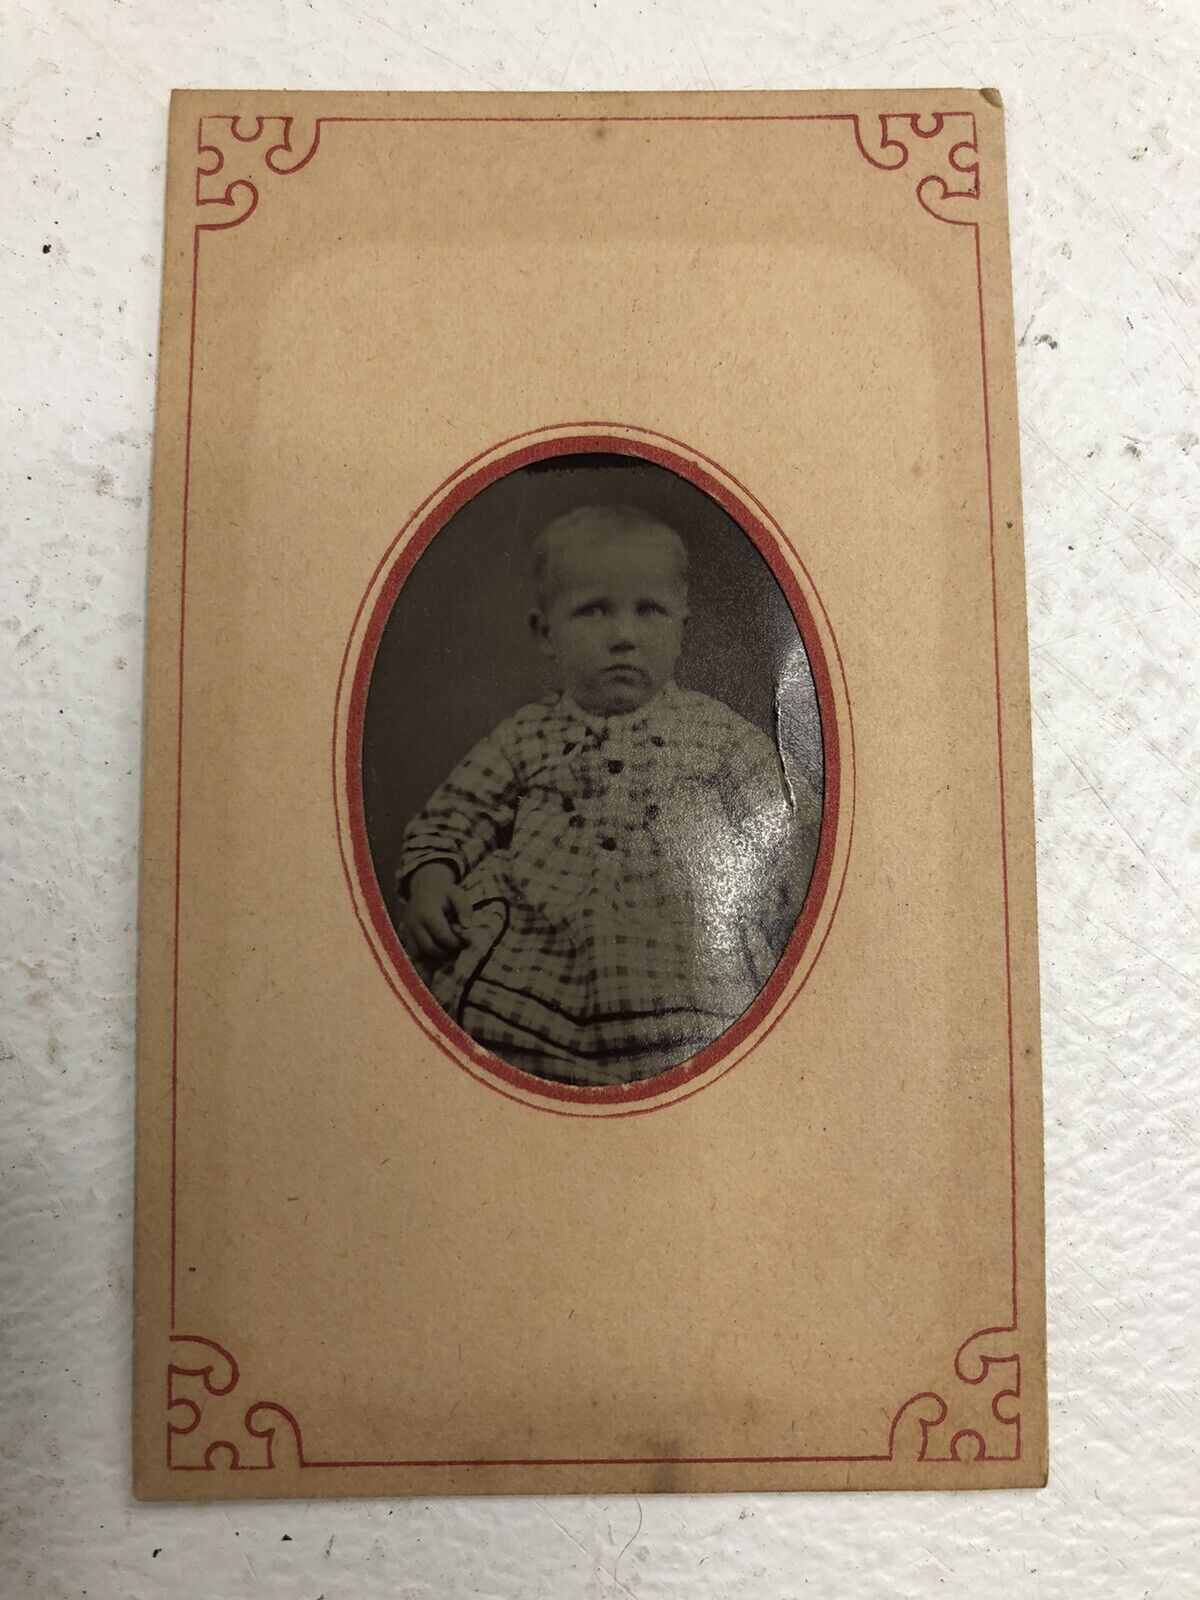 Vintage Antique CDV Card Of Young Baby - Anne Rebecca Byers.